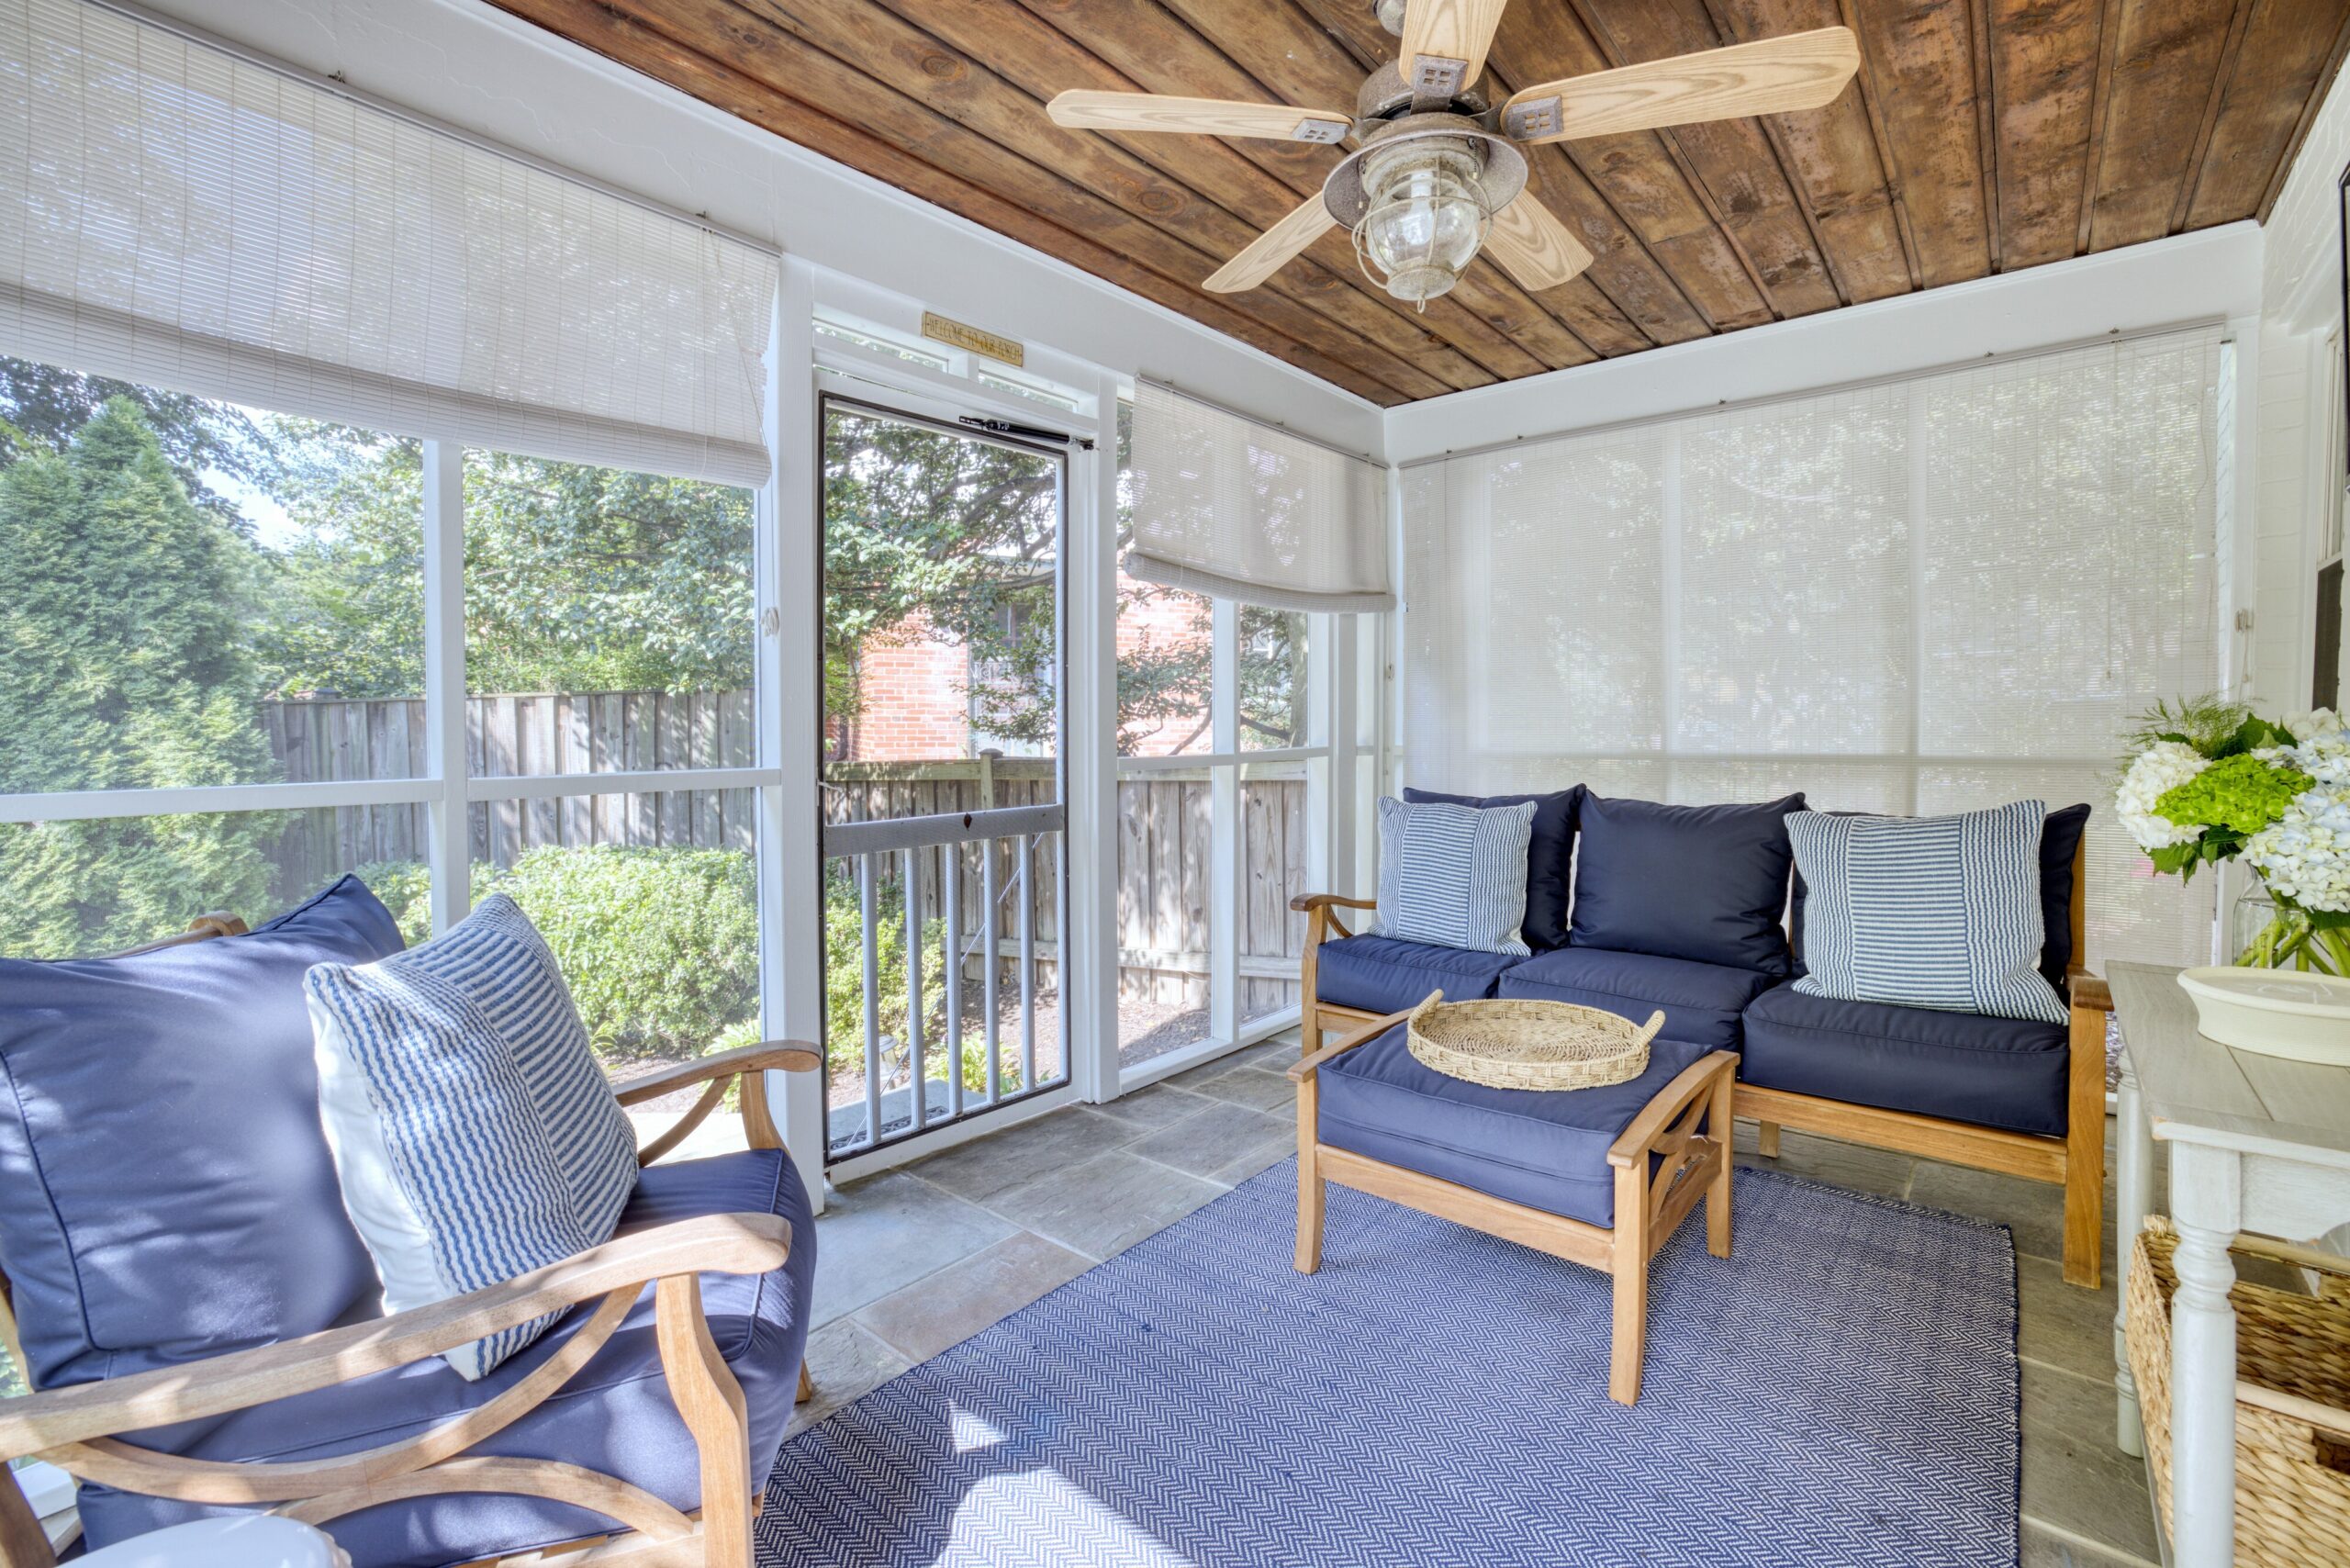 Interior professional photo of screened in porch of 1946 Cape Cod home in Alexandria, VA with blues and wooden patio furniture and ceiling fan